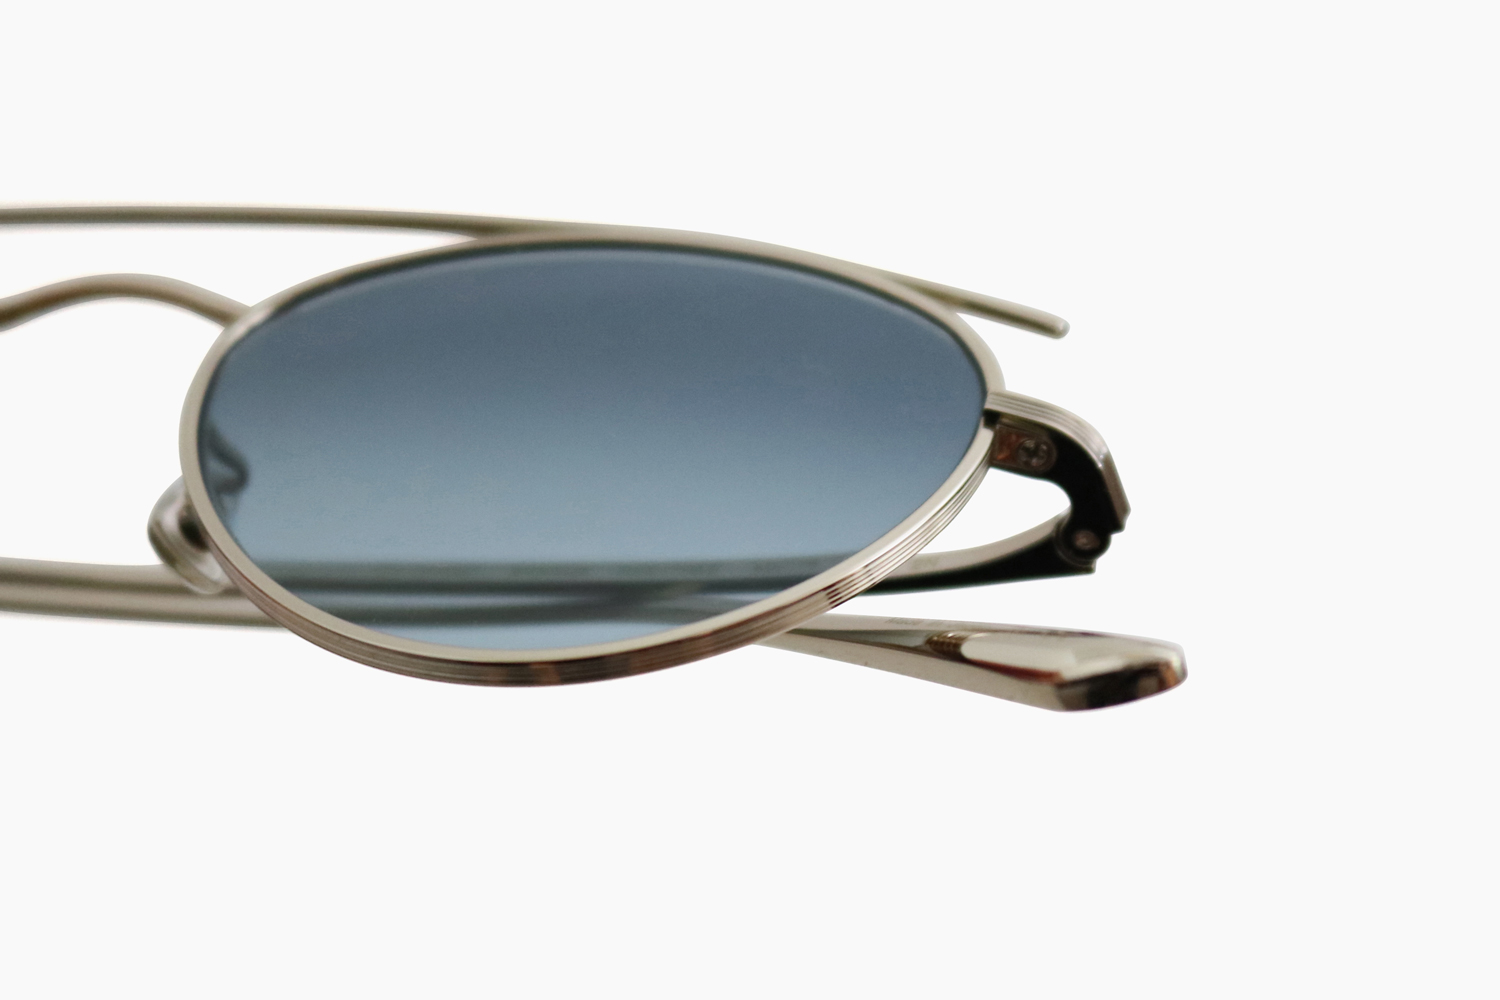 OLIVER PEOPLES THE ROW｜HIGHTREE OV1258ST - 5035Q8｜OLIVER PEOPLES